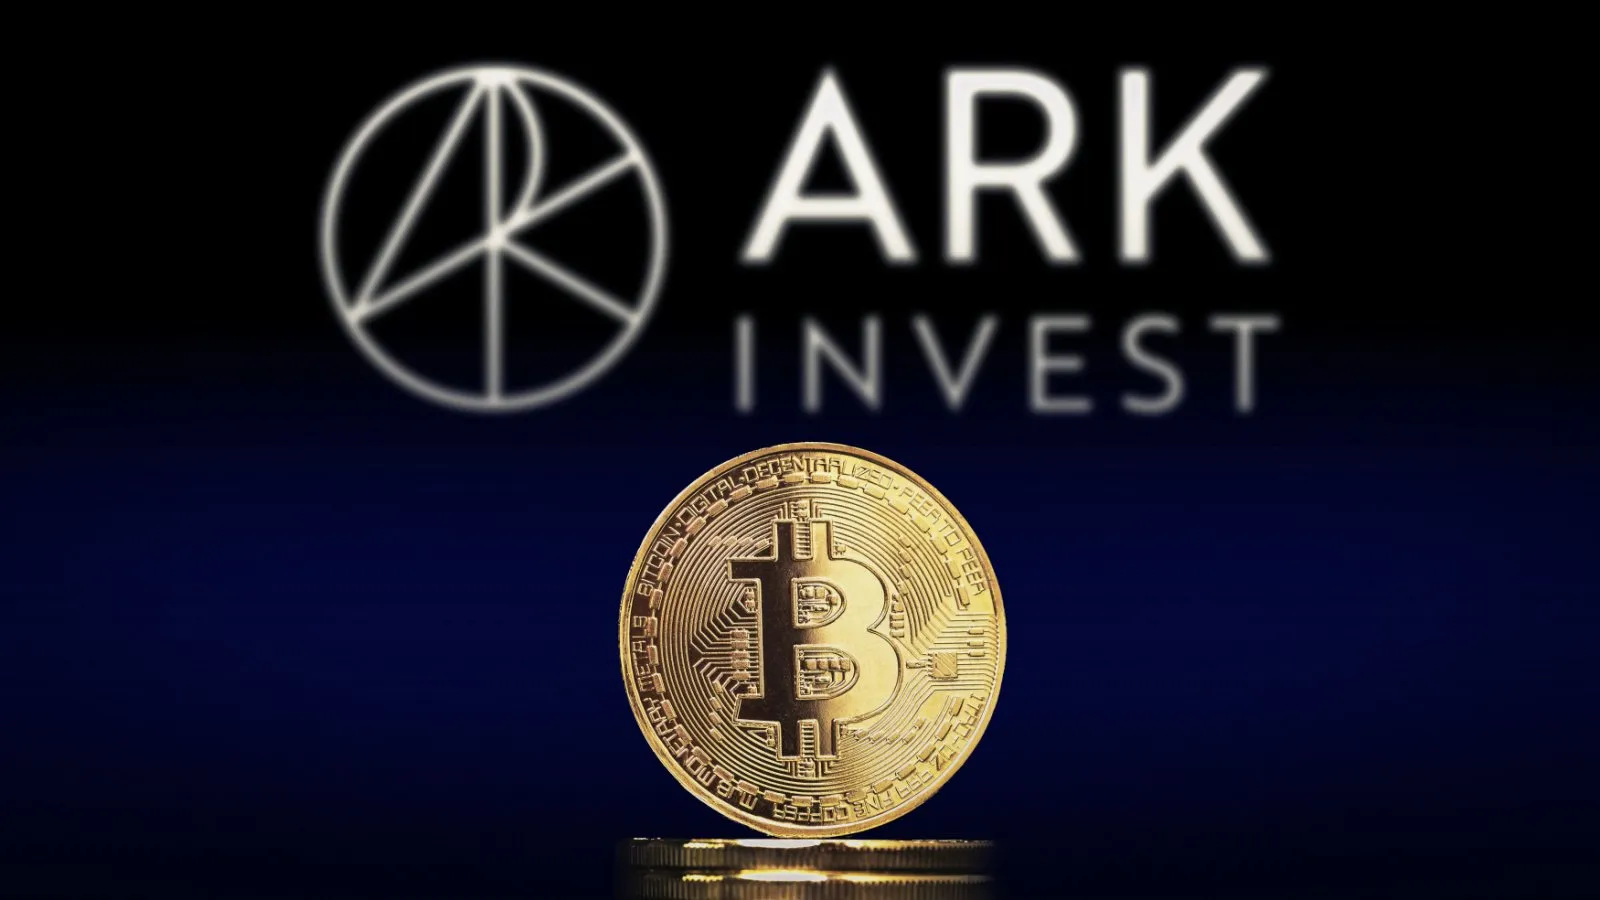 ARK Invest is an asset fund manager led by Cathie Wood. Source: Shutterstock